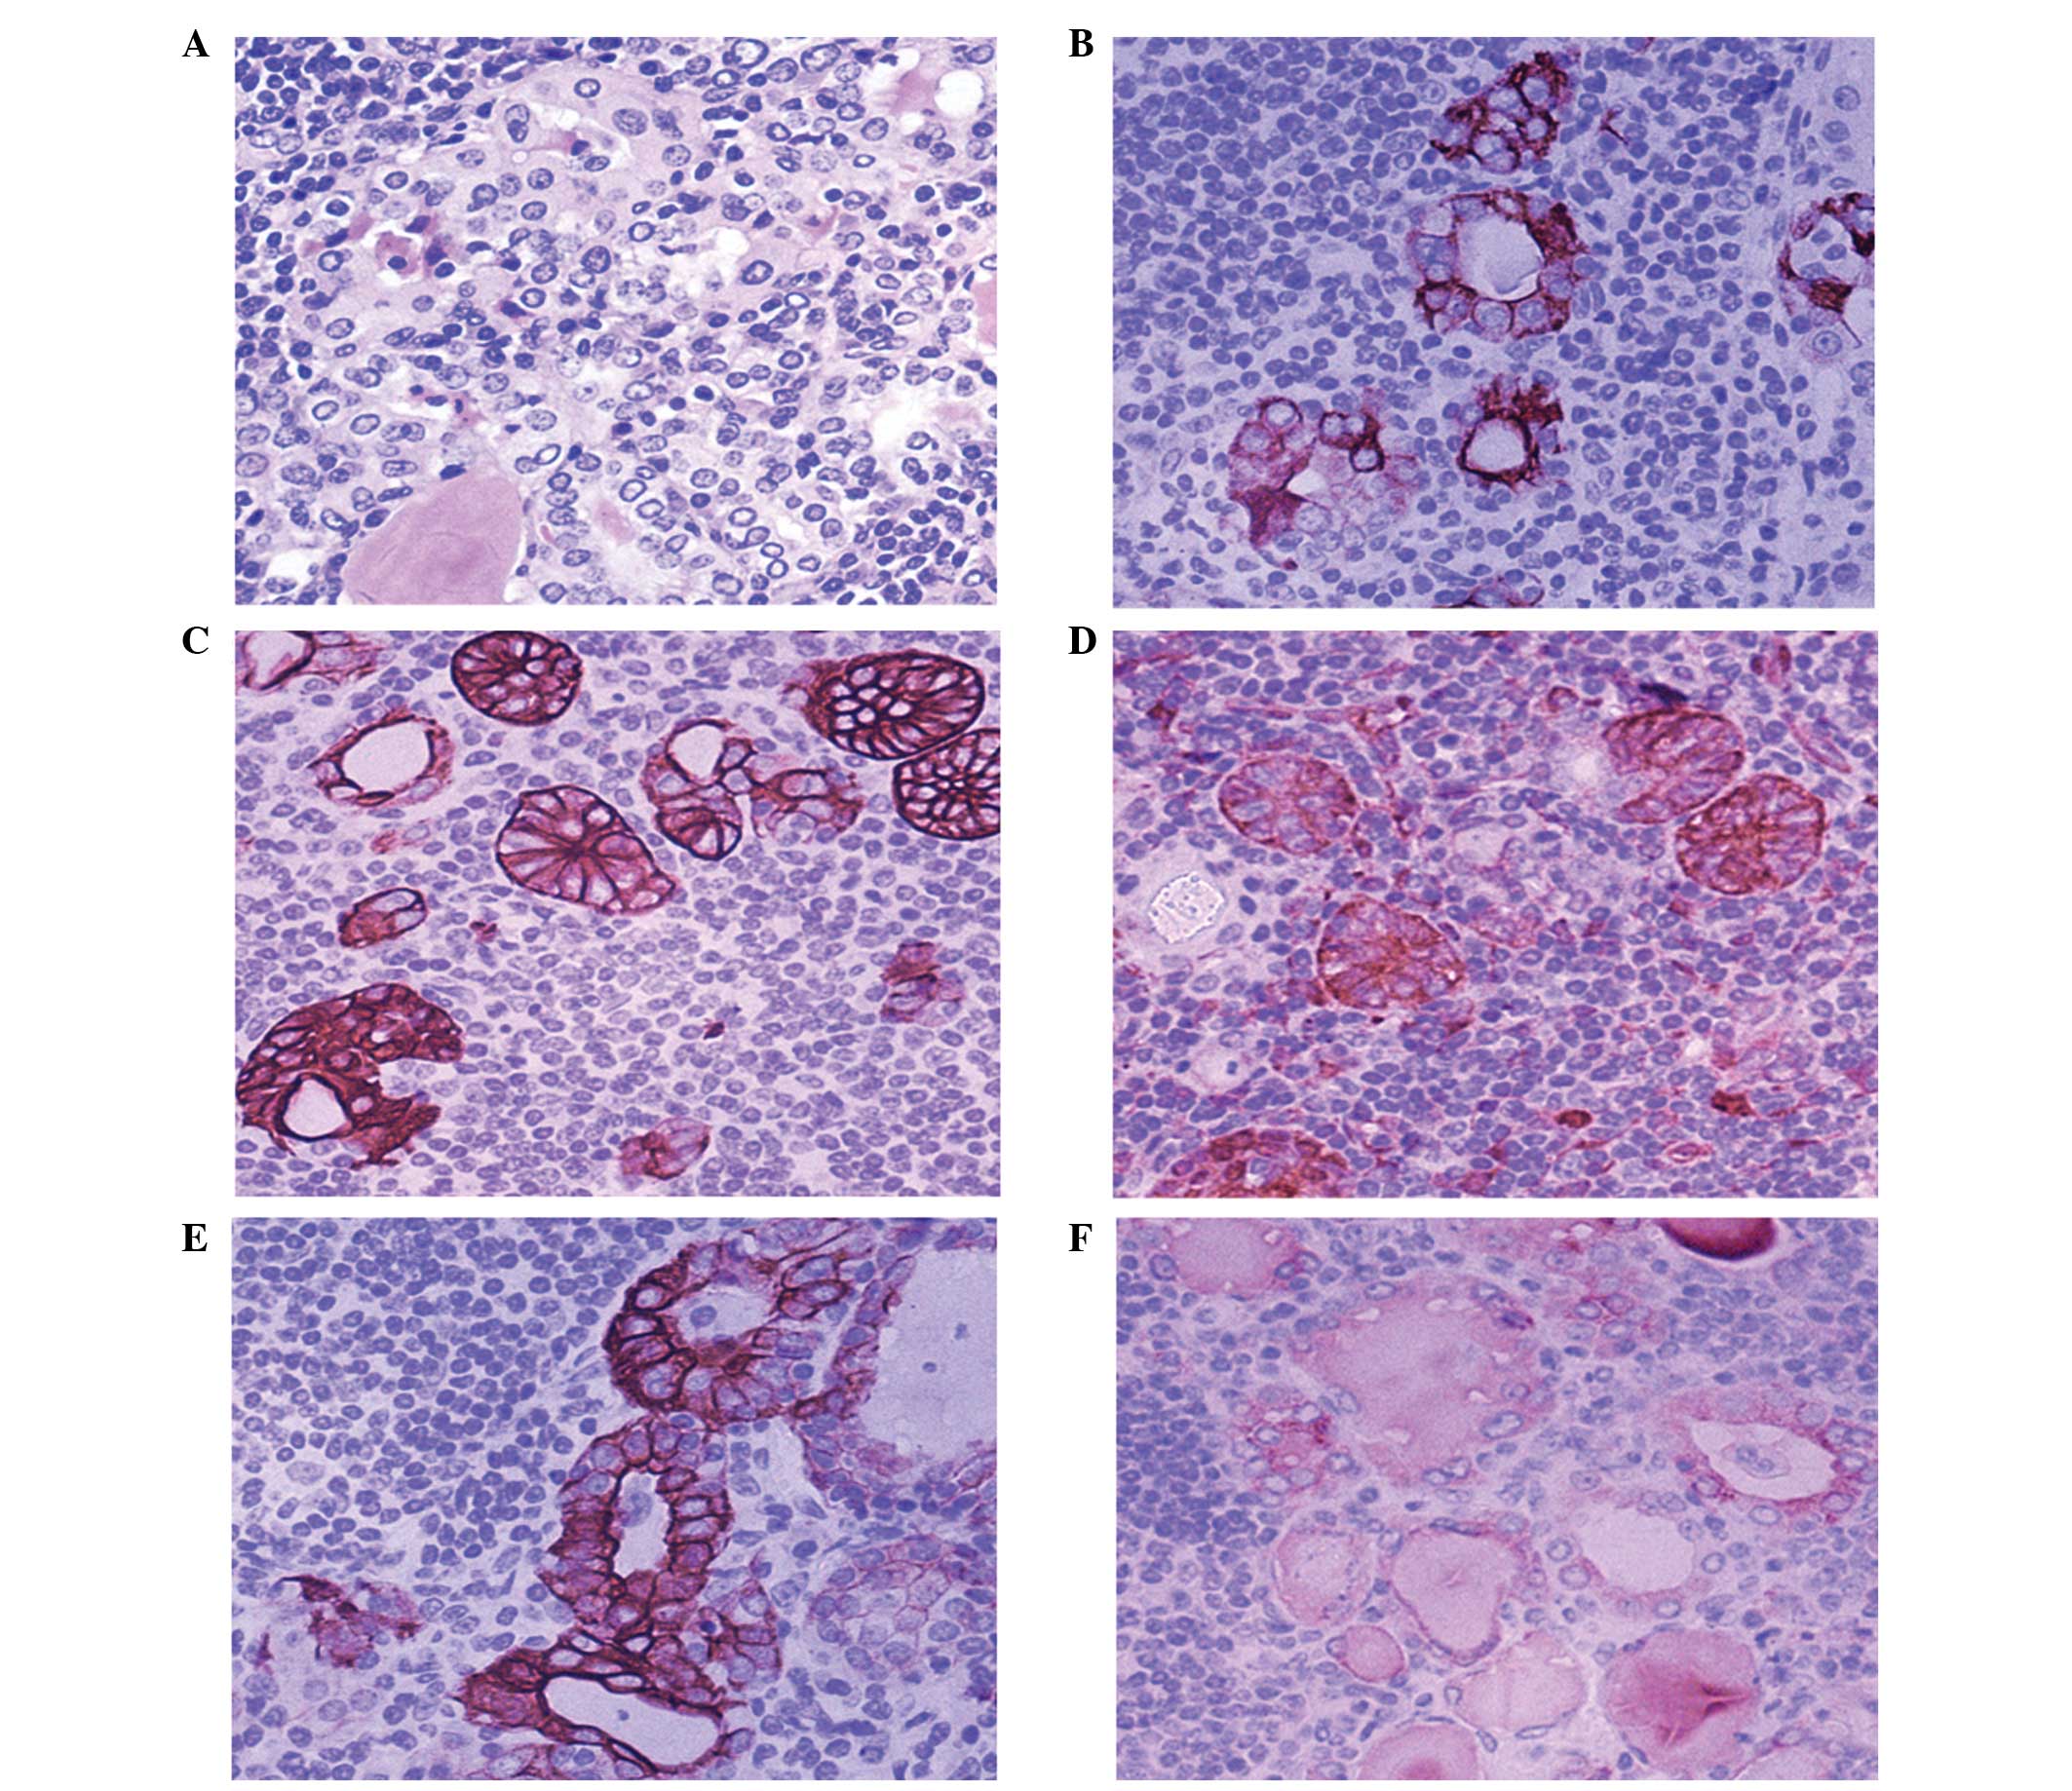 Intercellular Adhesion Molecule 1 Is A Sensitive And Diagnostically Useful Immunohistochemical Marker Of Papillary Thyroid Cancer Ptc And Of Ptc Like Nuclear Alterations In Hashimoto S Thyroiditis